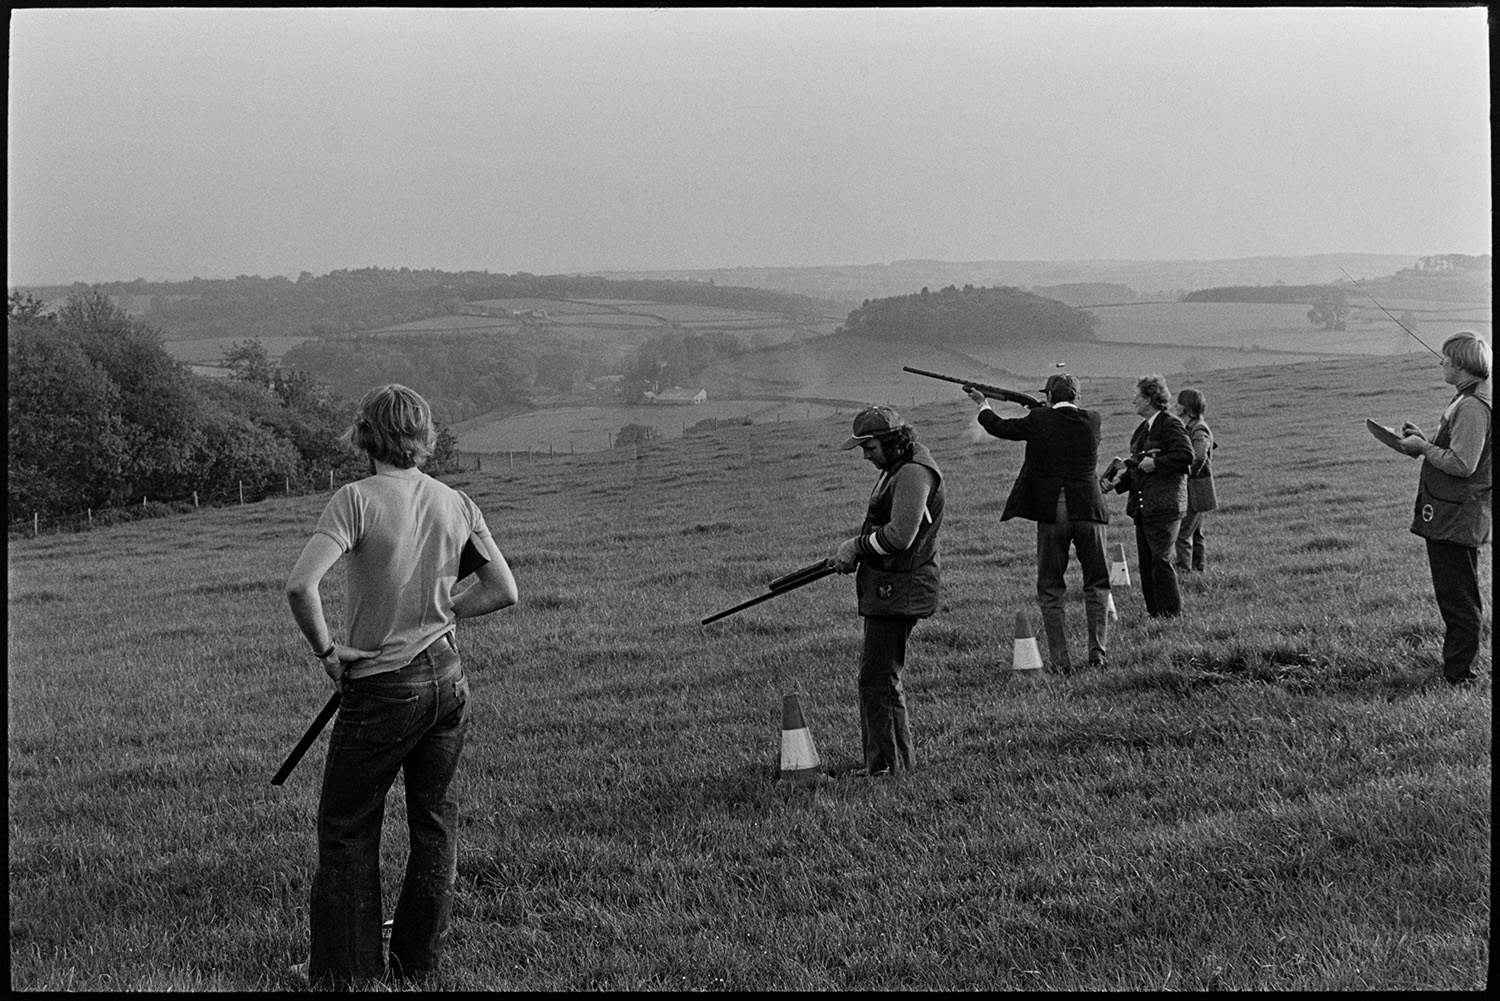 Clay pigeon shoot and games roulette for champagne. 
[Men shooting in a field at a clay pigeon shoot at Harepath, Beaford. A landscape of fields and trees is visible in the background.]